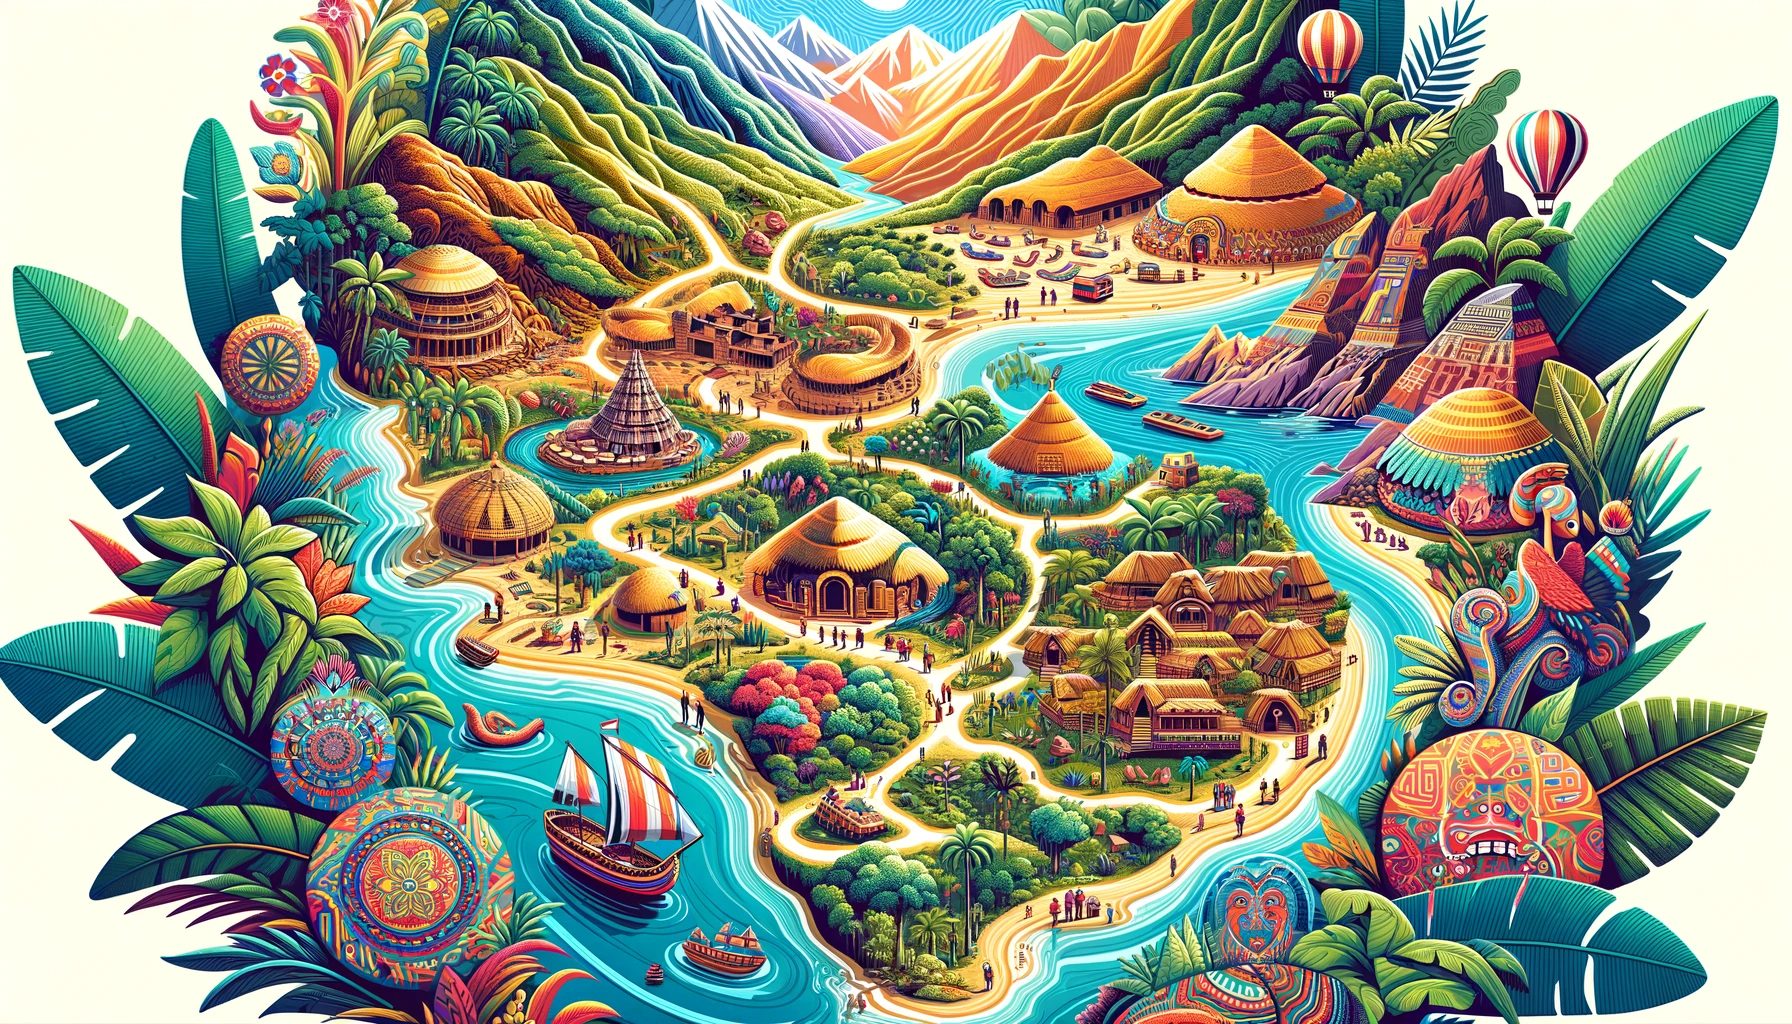 Colorful, detailed fantasy landscape illustration with tropical theme.